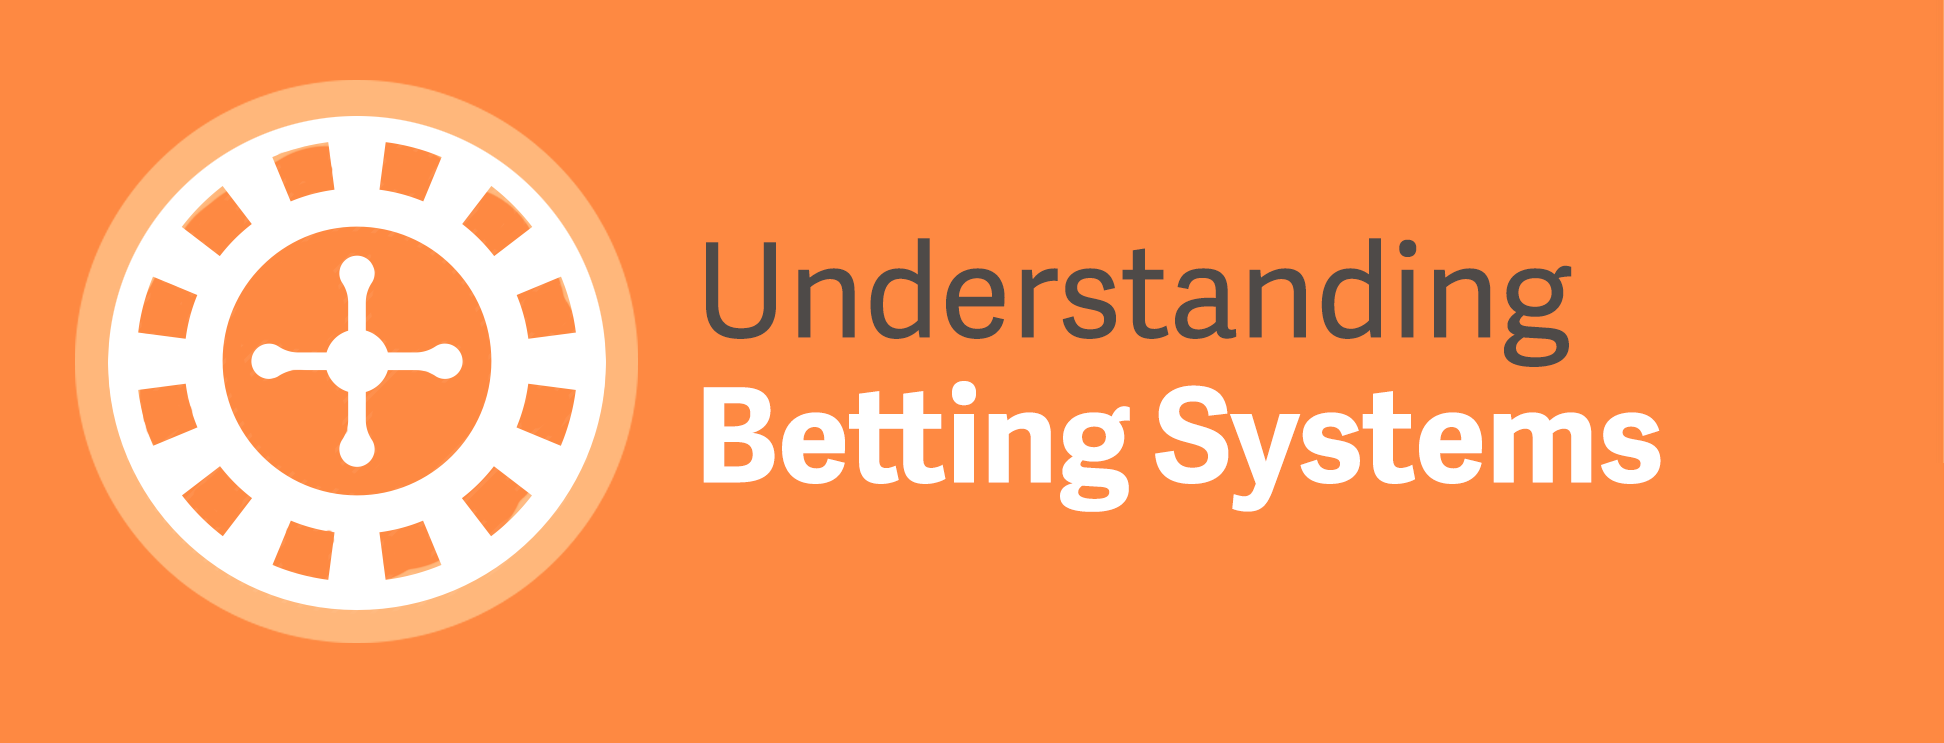 Understanding Betting Systems